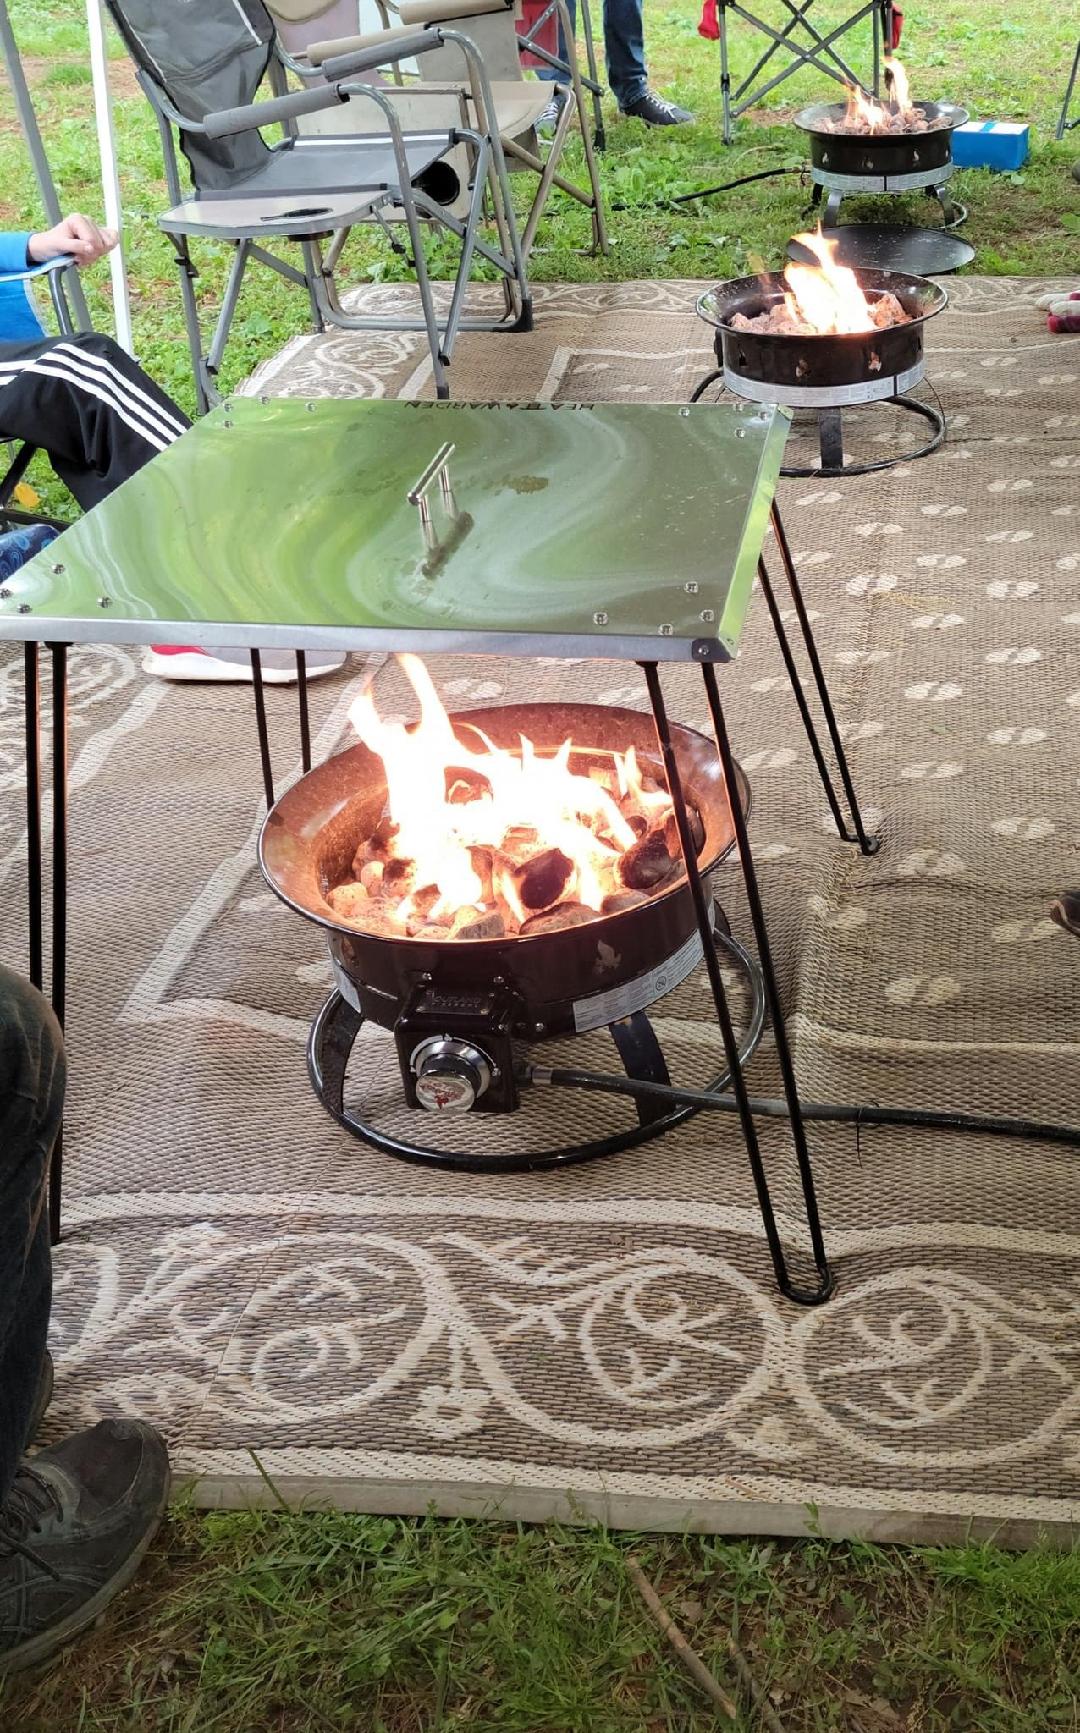 A “MUST HAVE” for Camping. Heat Warden® USA QUALITY 24"x 24" Camping Square Heat Deflector with 24" Foldable Legs. (See menu above for Specs.)